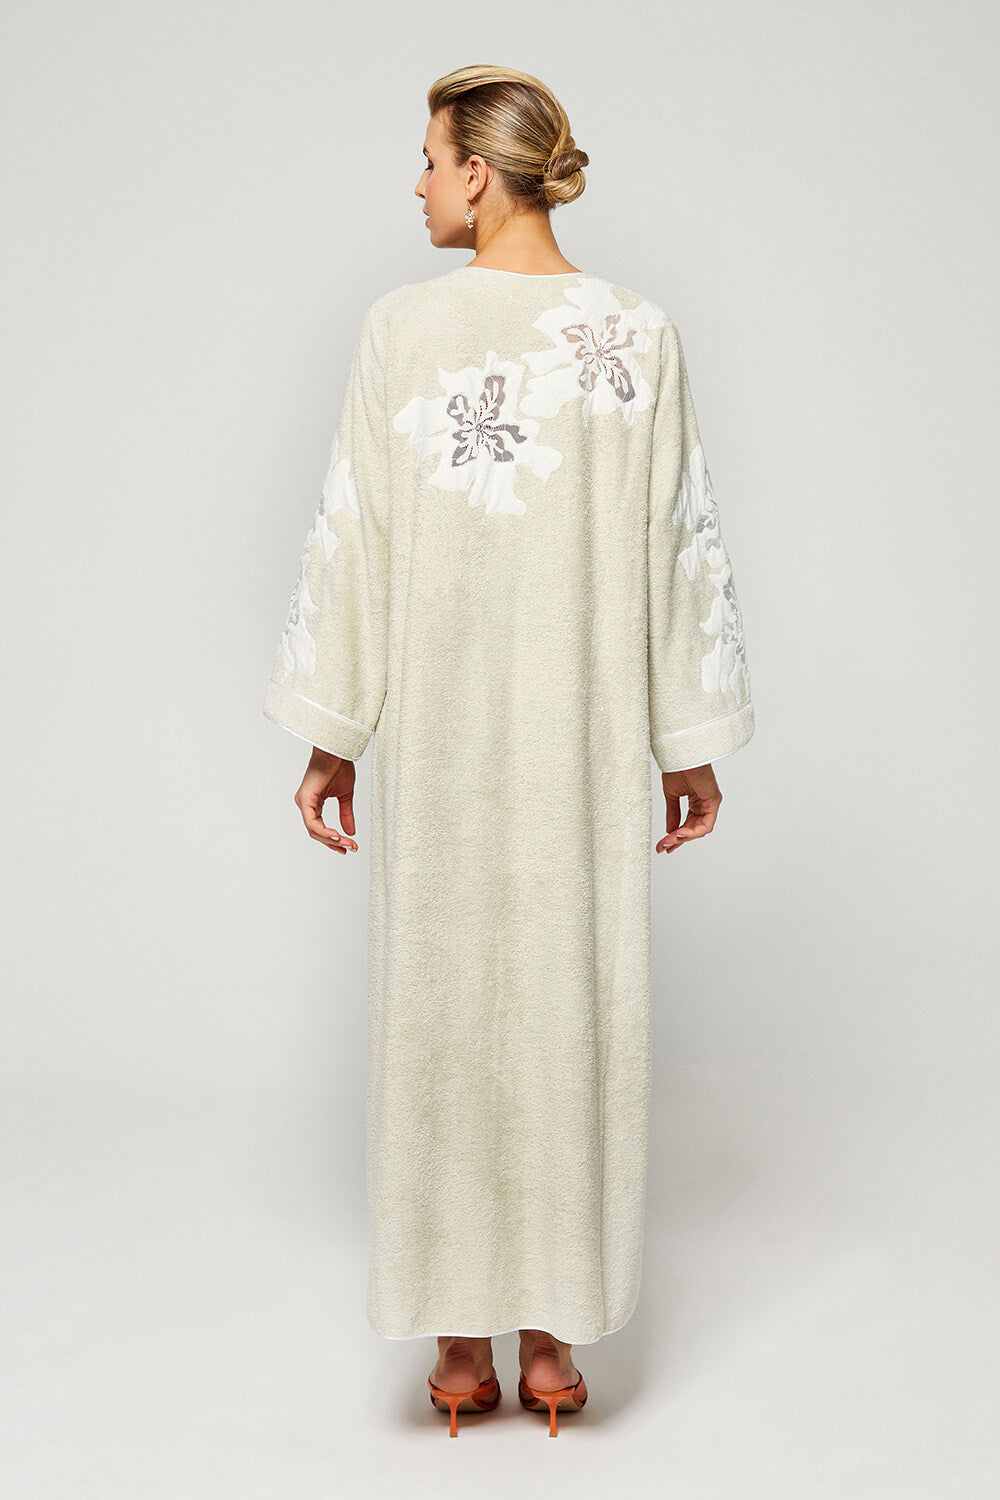 Anitte - Zippered and Trimmed Cotton Bathrobe - Beige